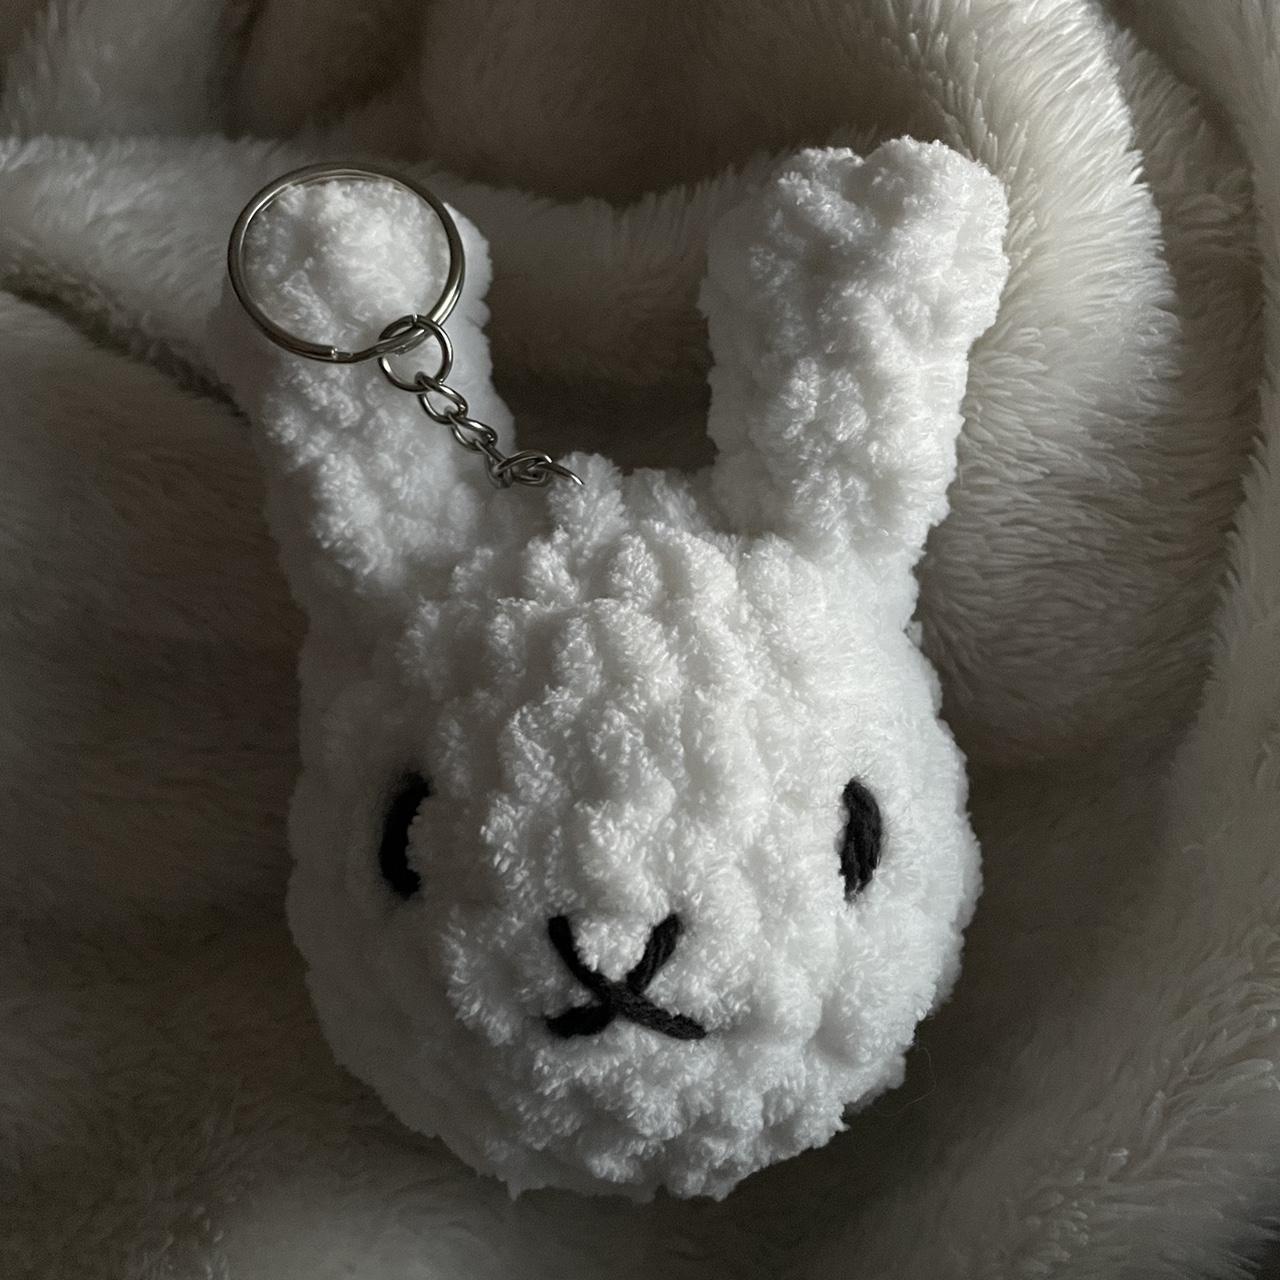 Miffy Crochet Keychain in Blue at Urban Outfitters